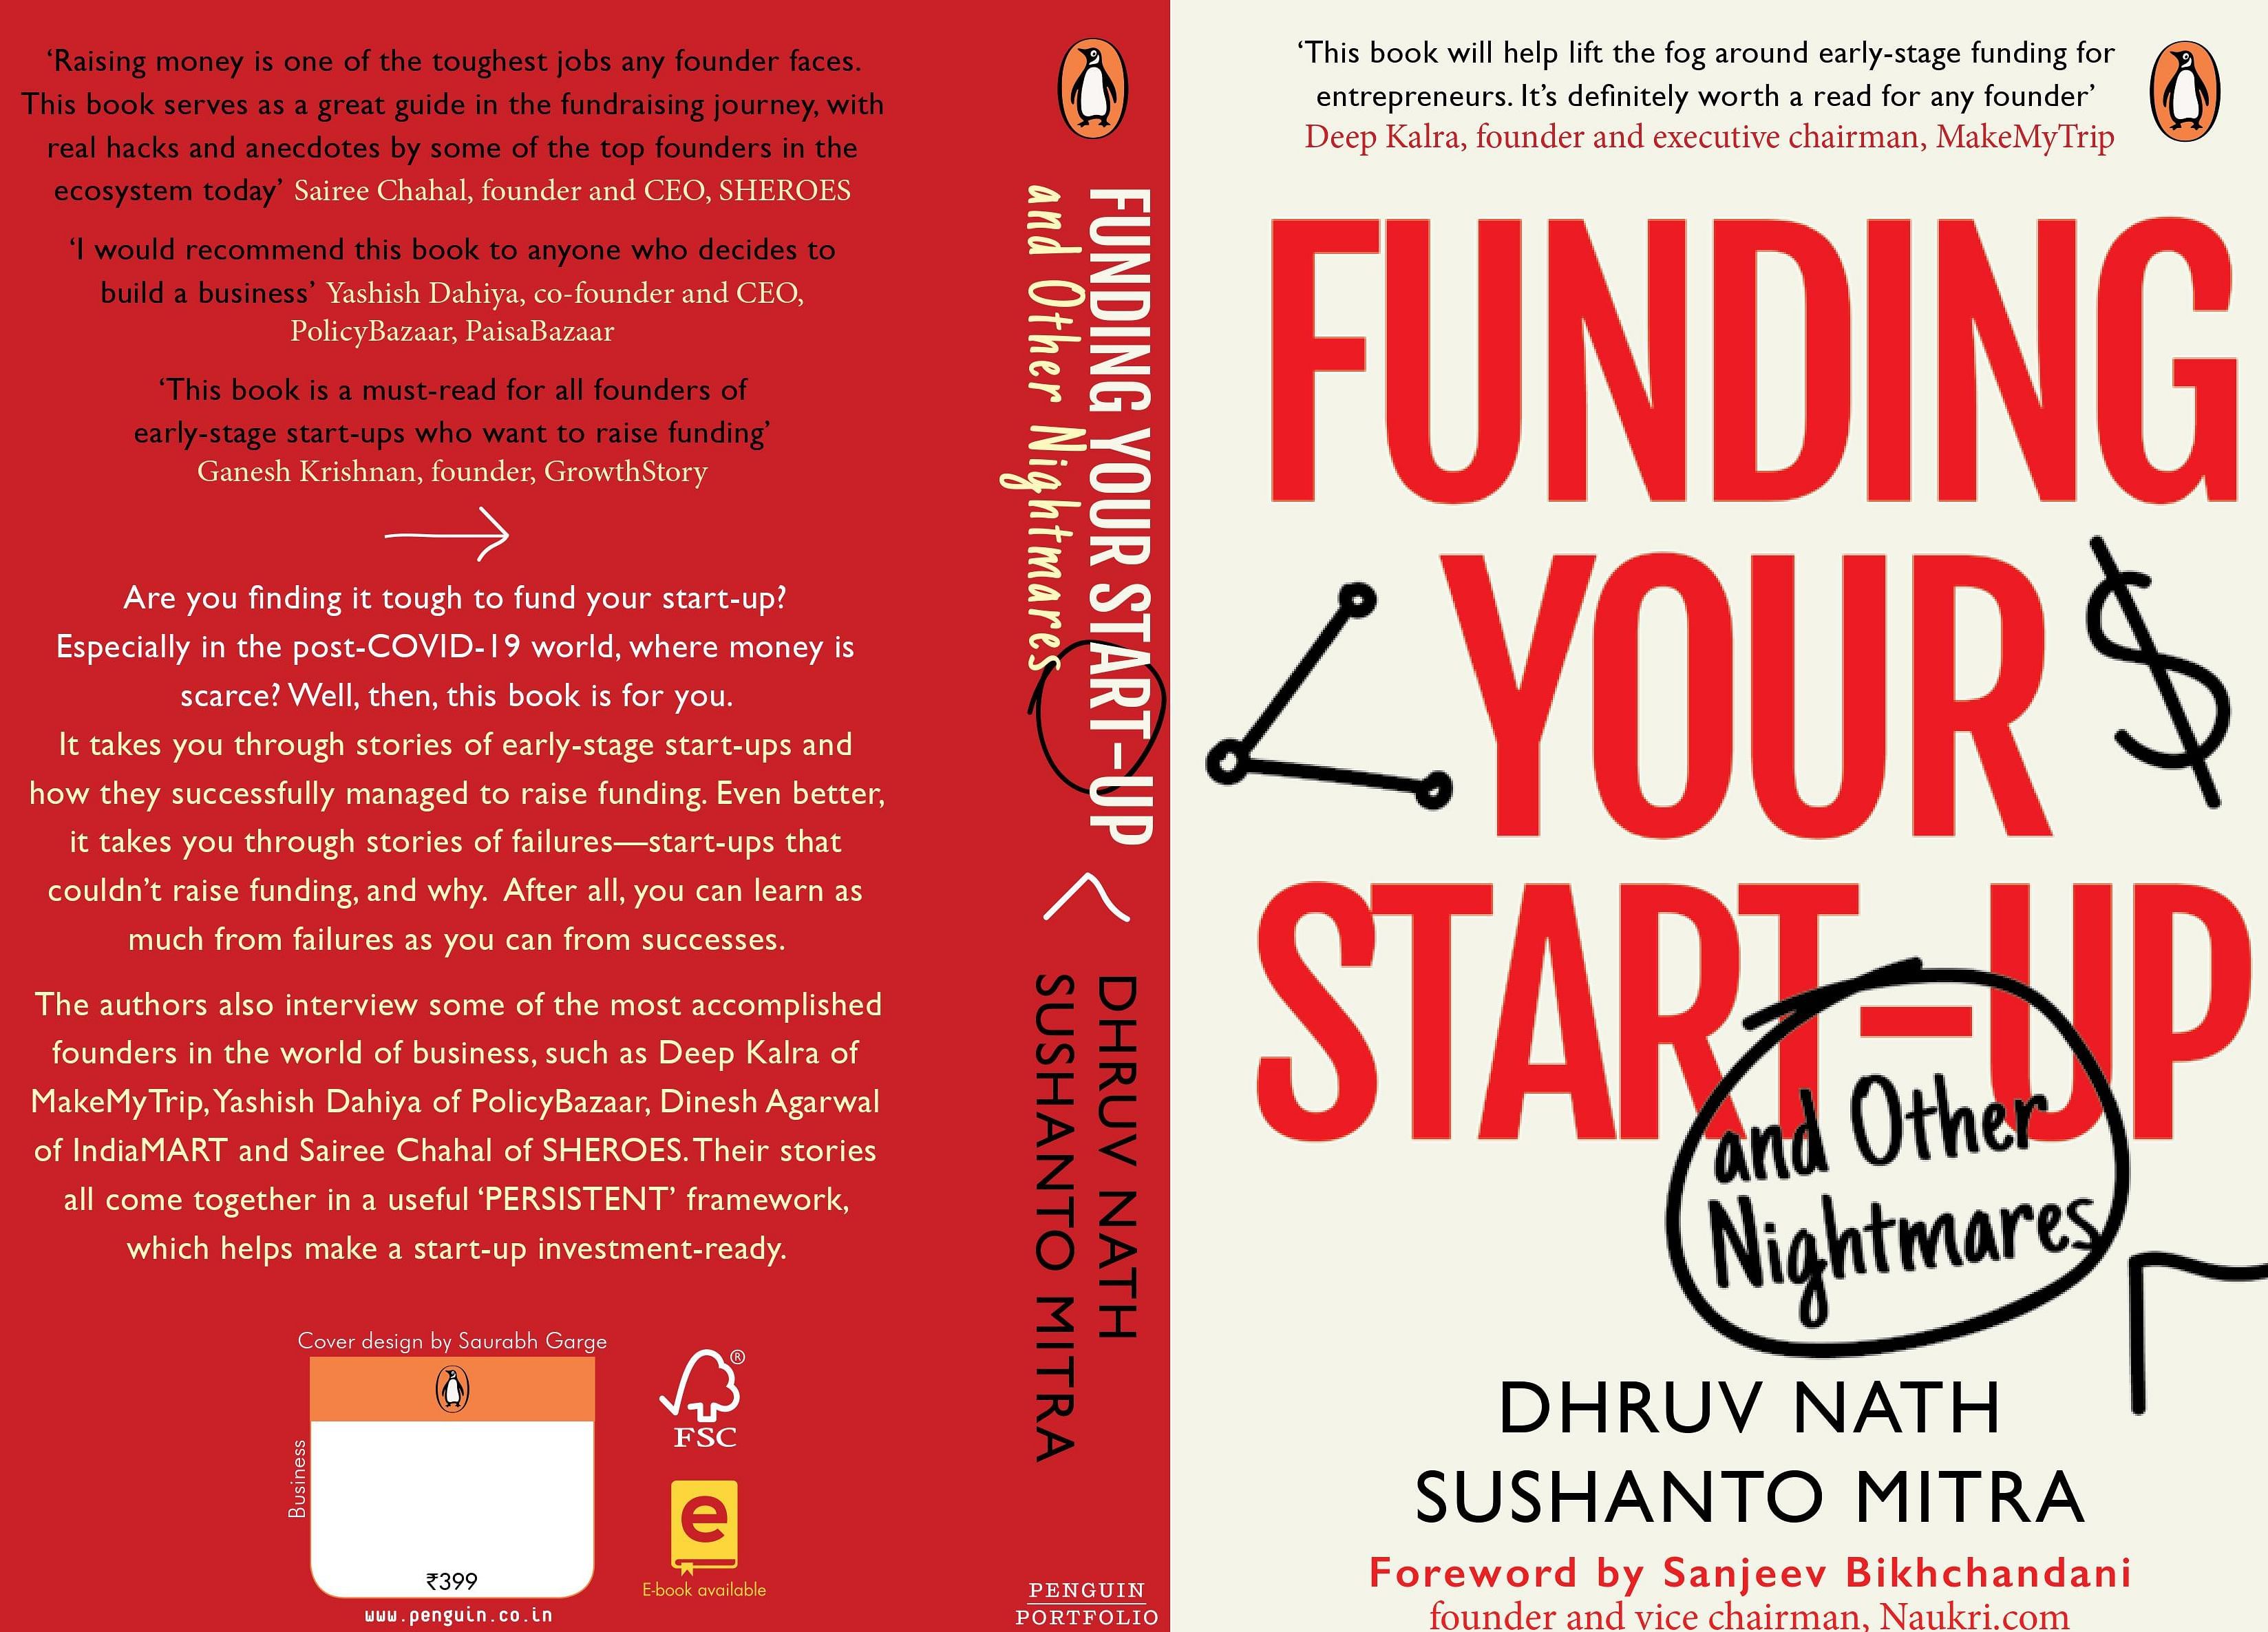 [YS Learn] What young startup founders can learn from the successes and failures of fundraising 
